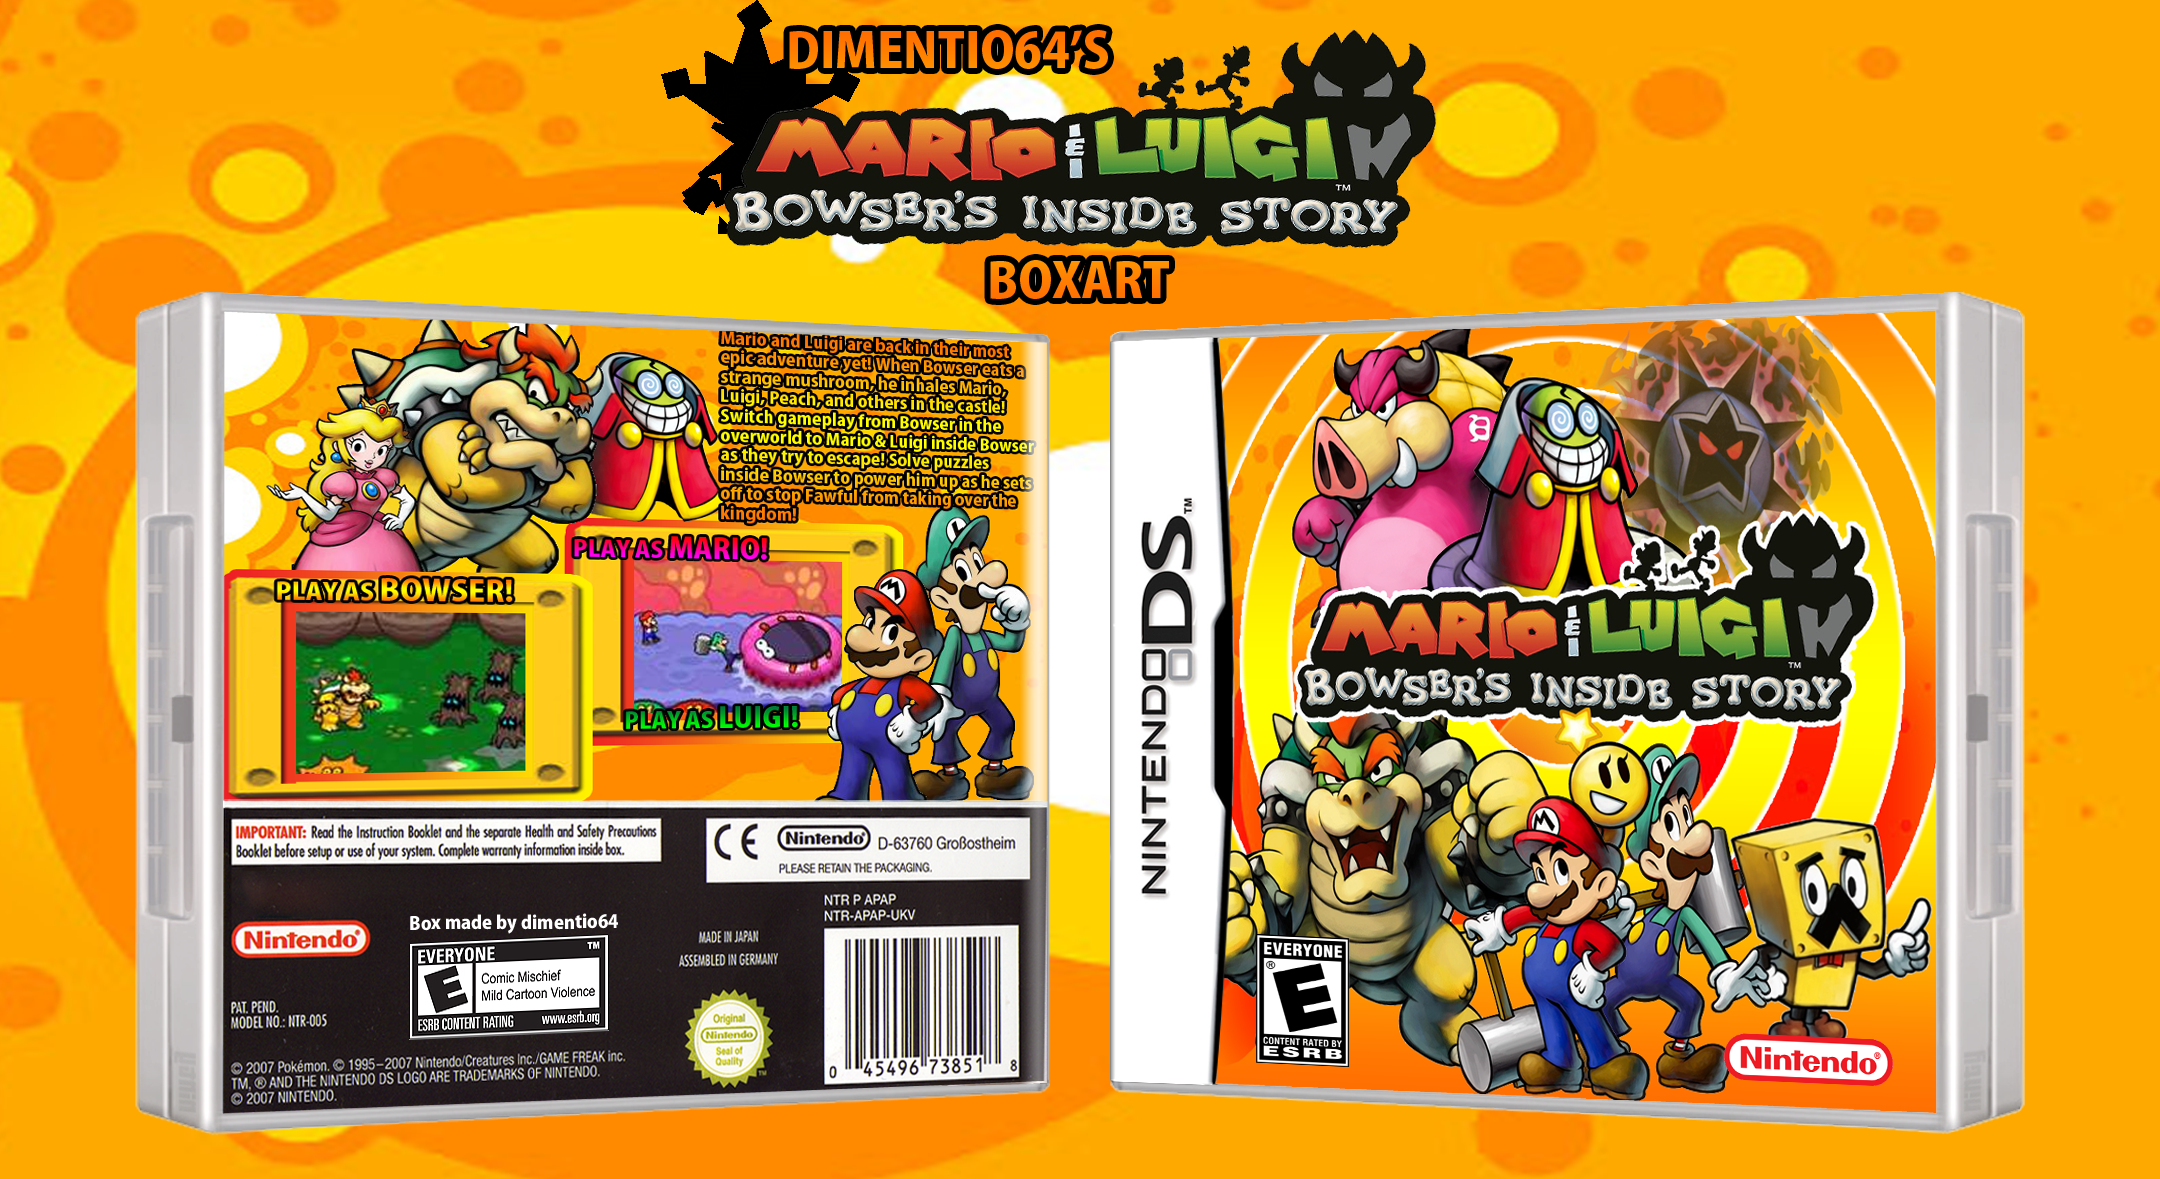 Viewing full size Mario & Luigi: Bowser's Inside Story box cover.